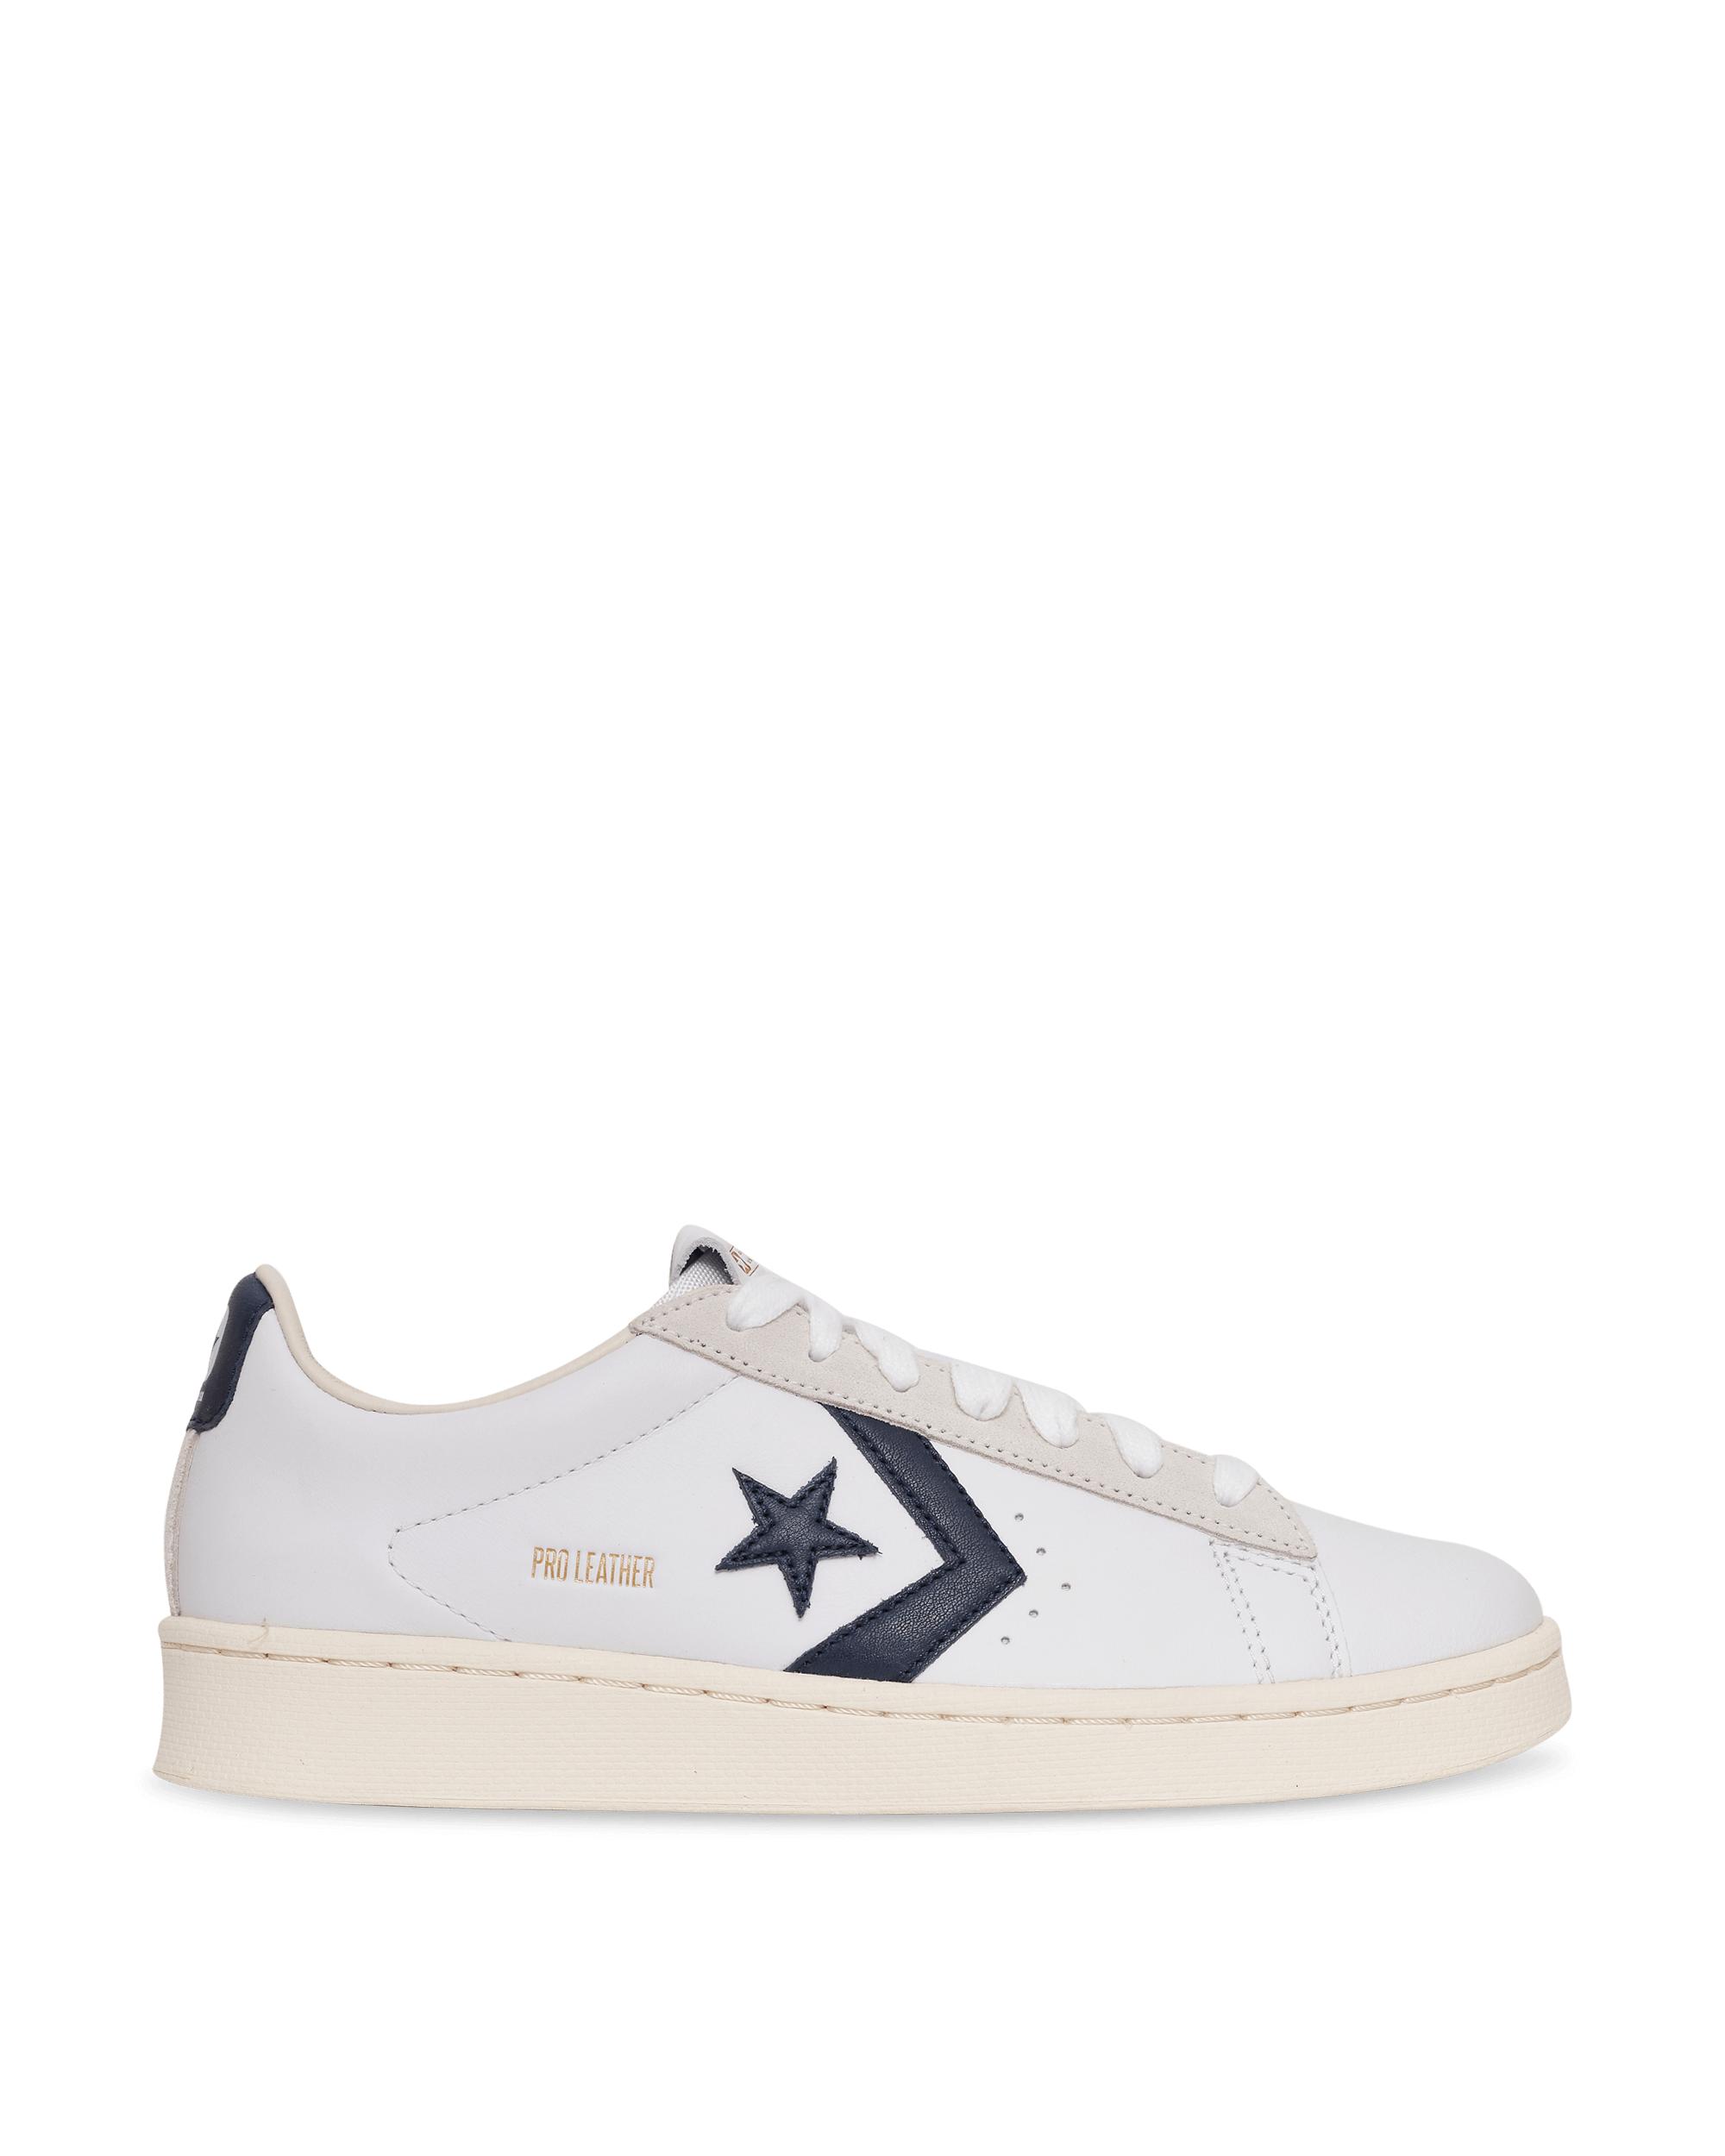 Converse Pro Leather Ox in White for Men - Save 74% - Lyst